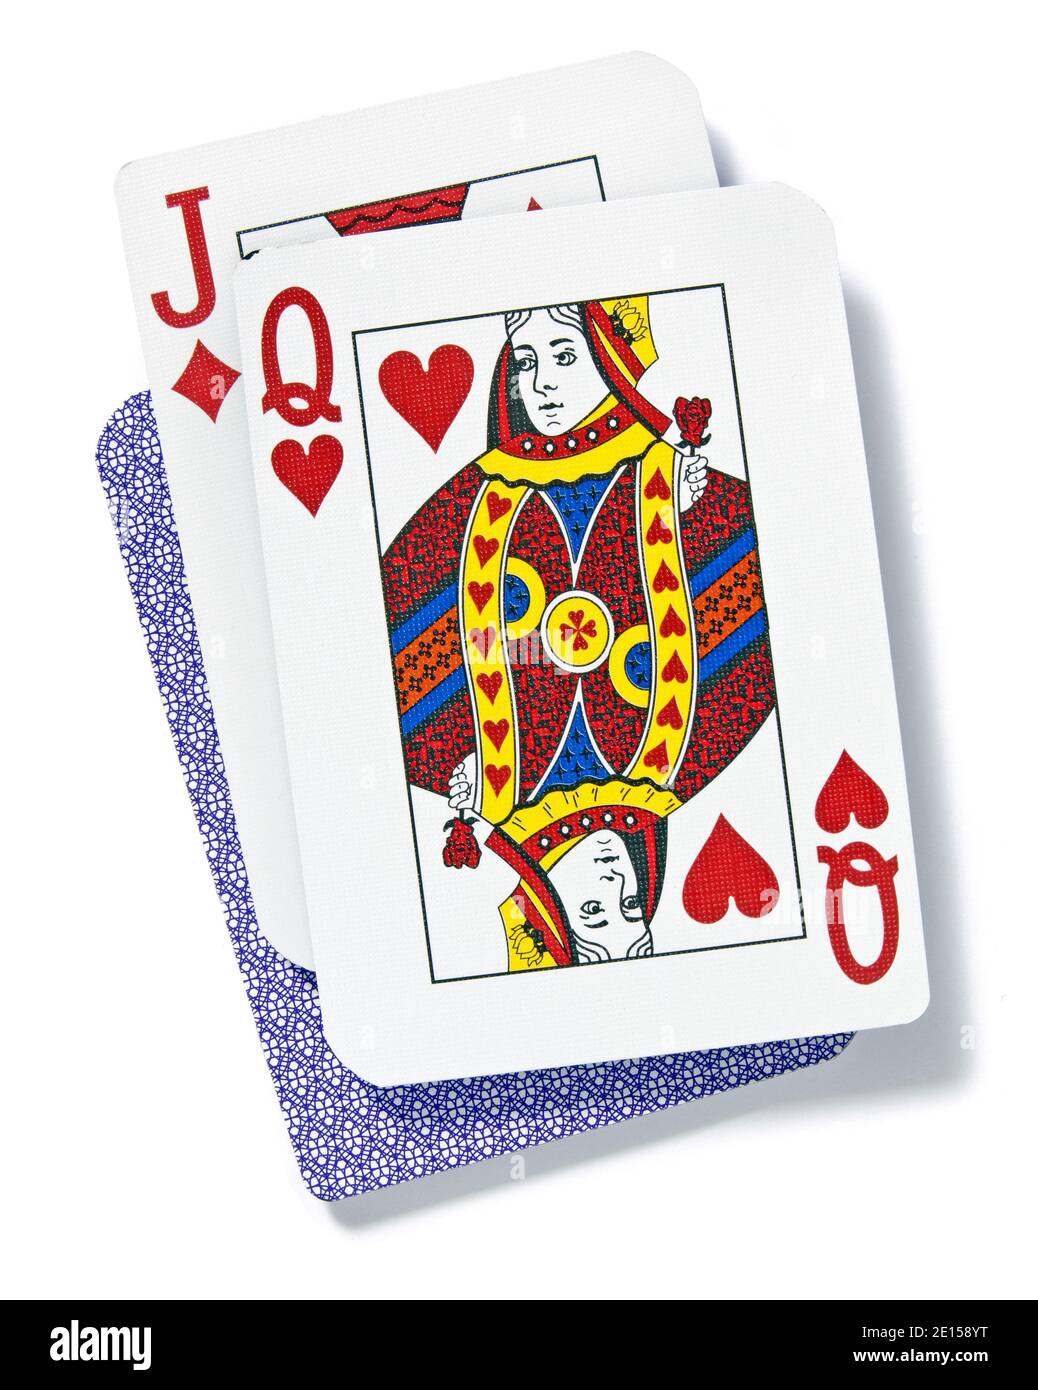 Queen and jack playing cards photographed on a white background Stock Photo